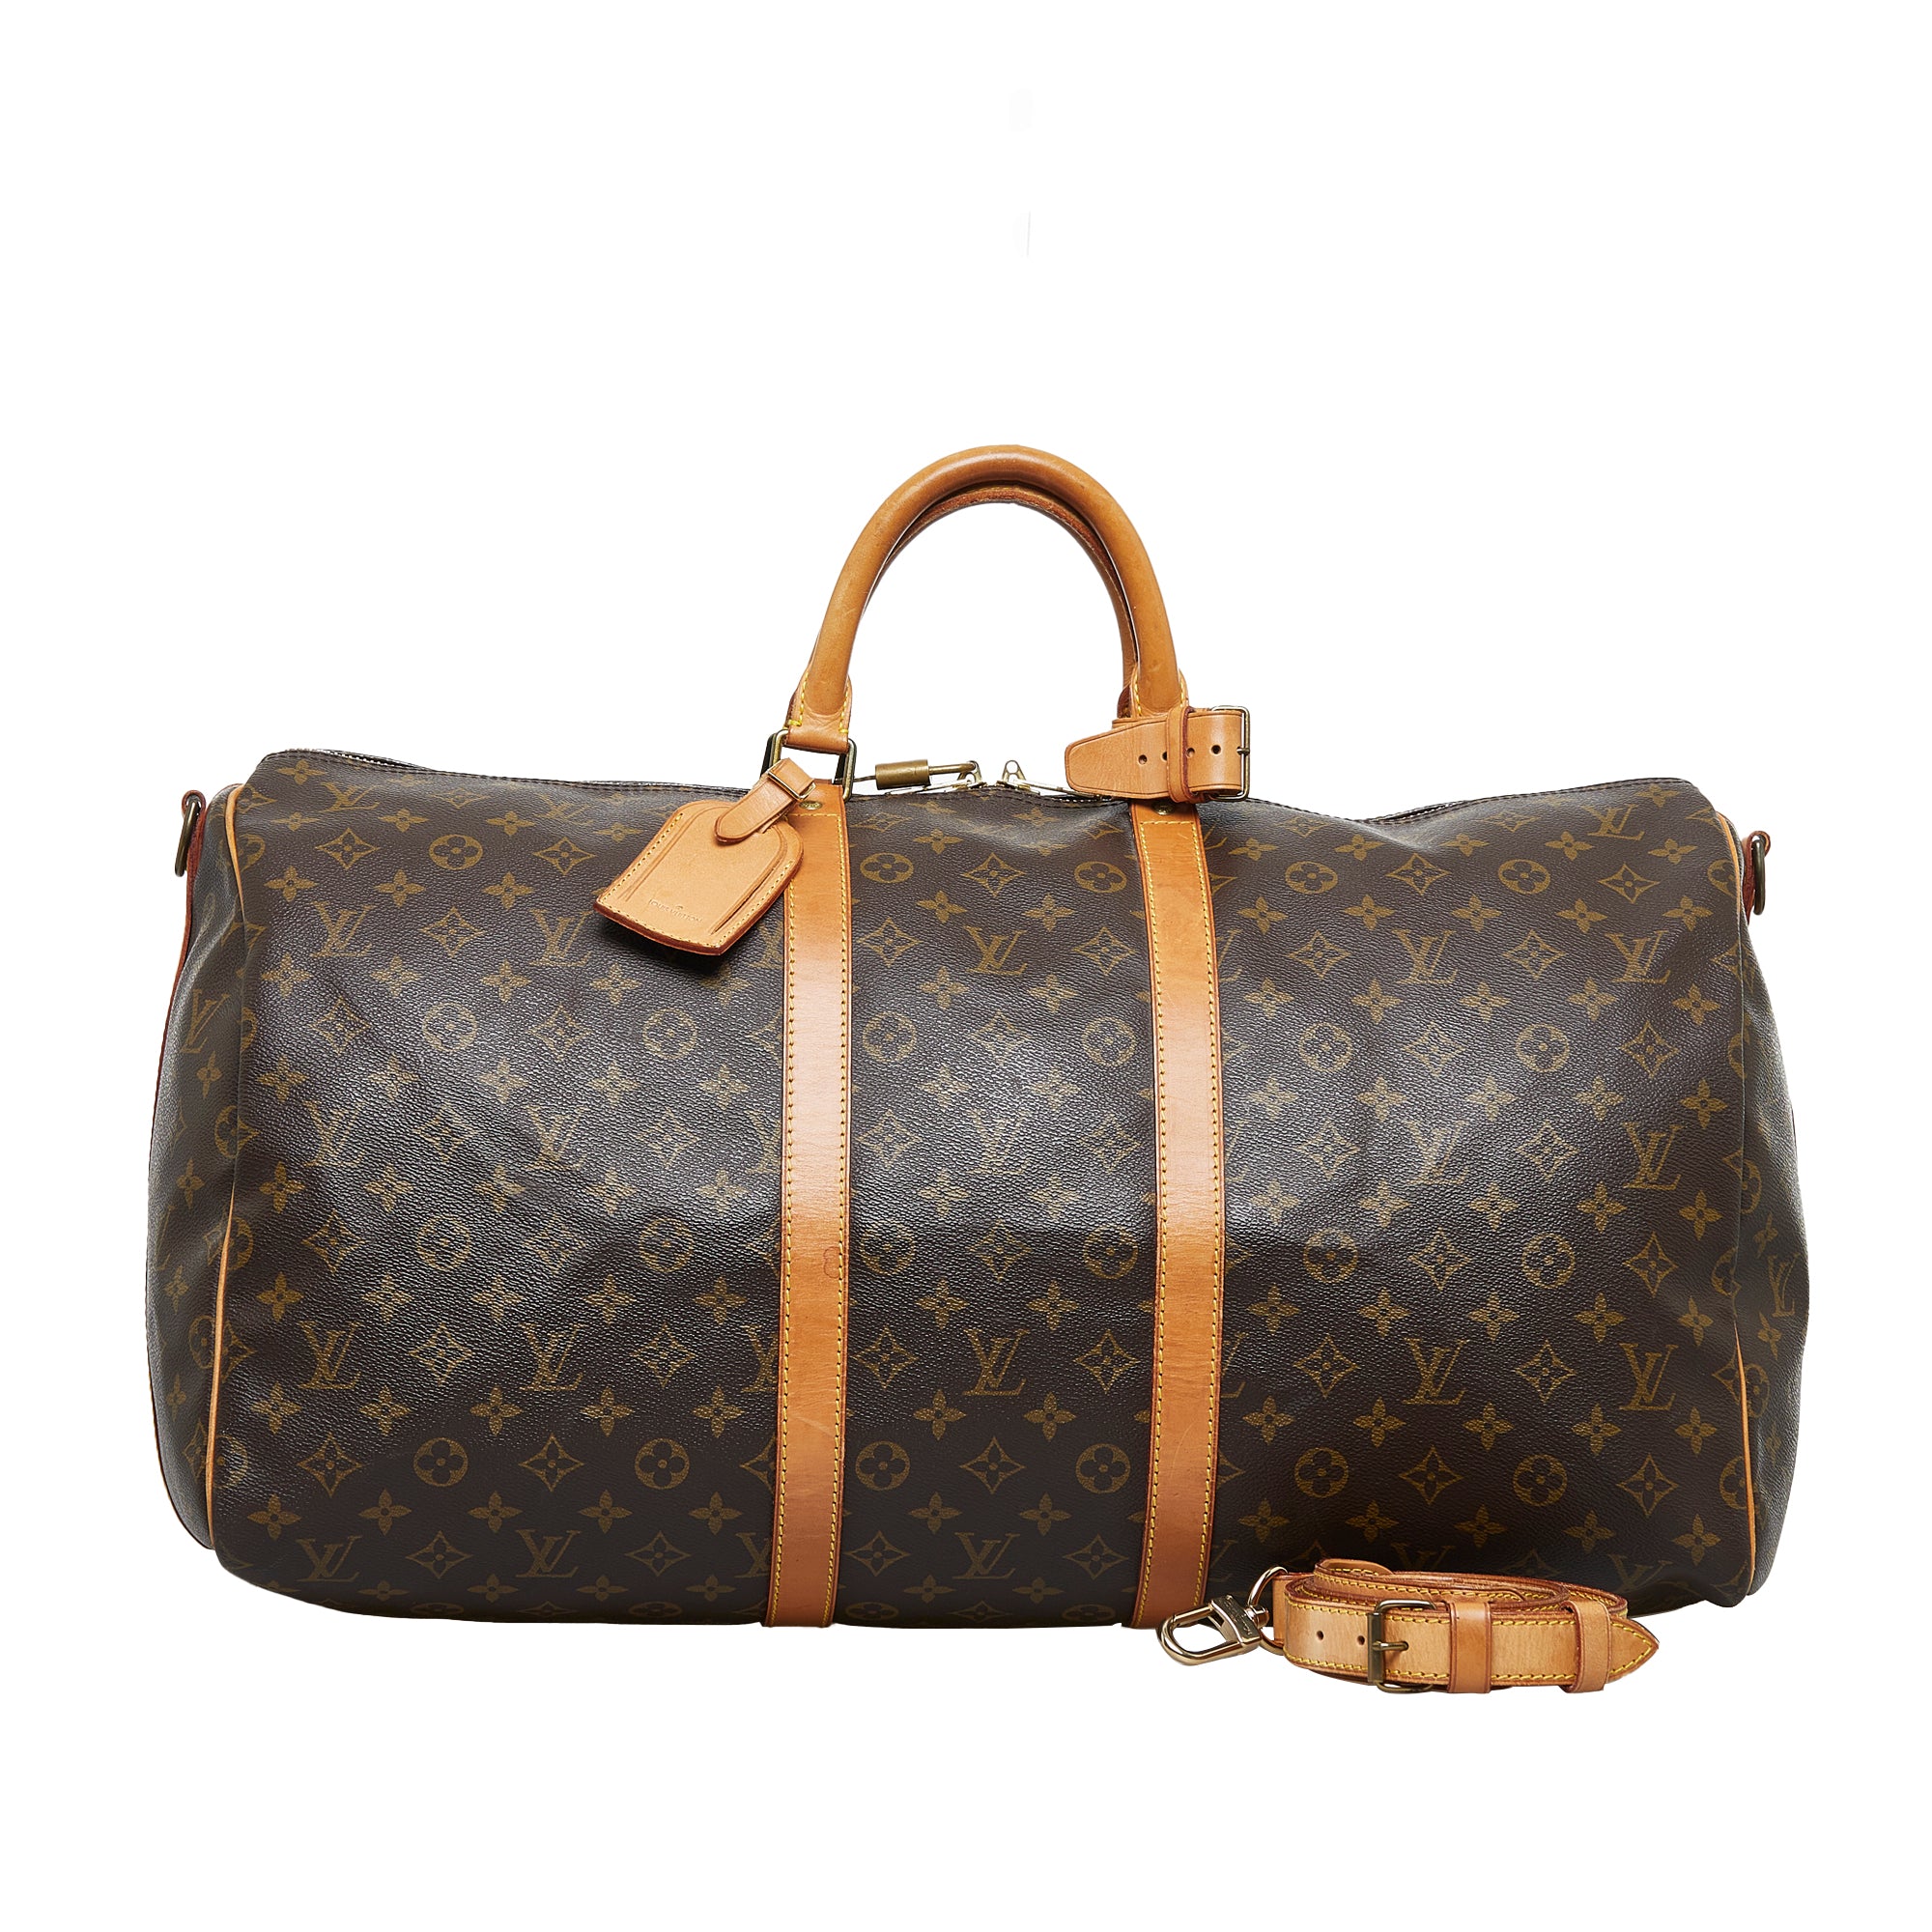 Always ready for a new adventure with the Louis Vuitton Keepall